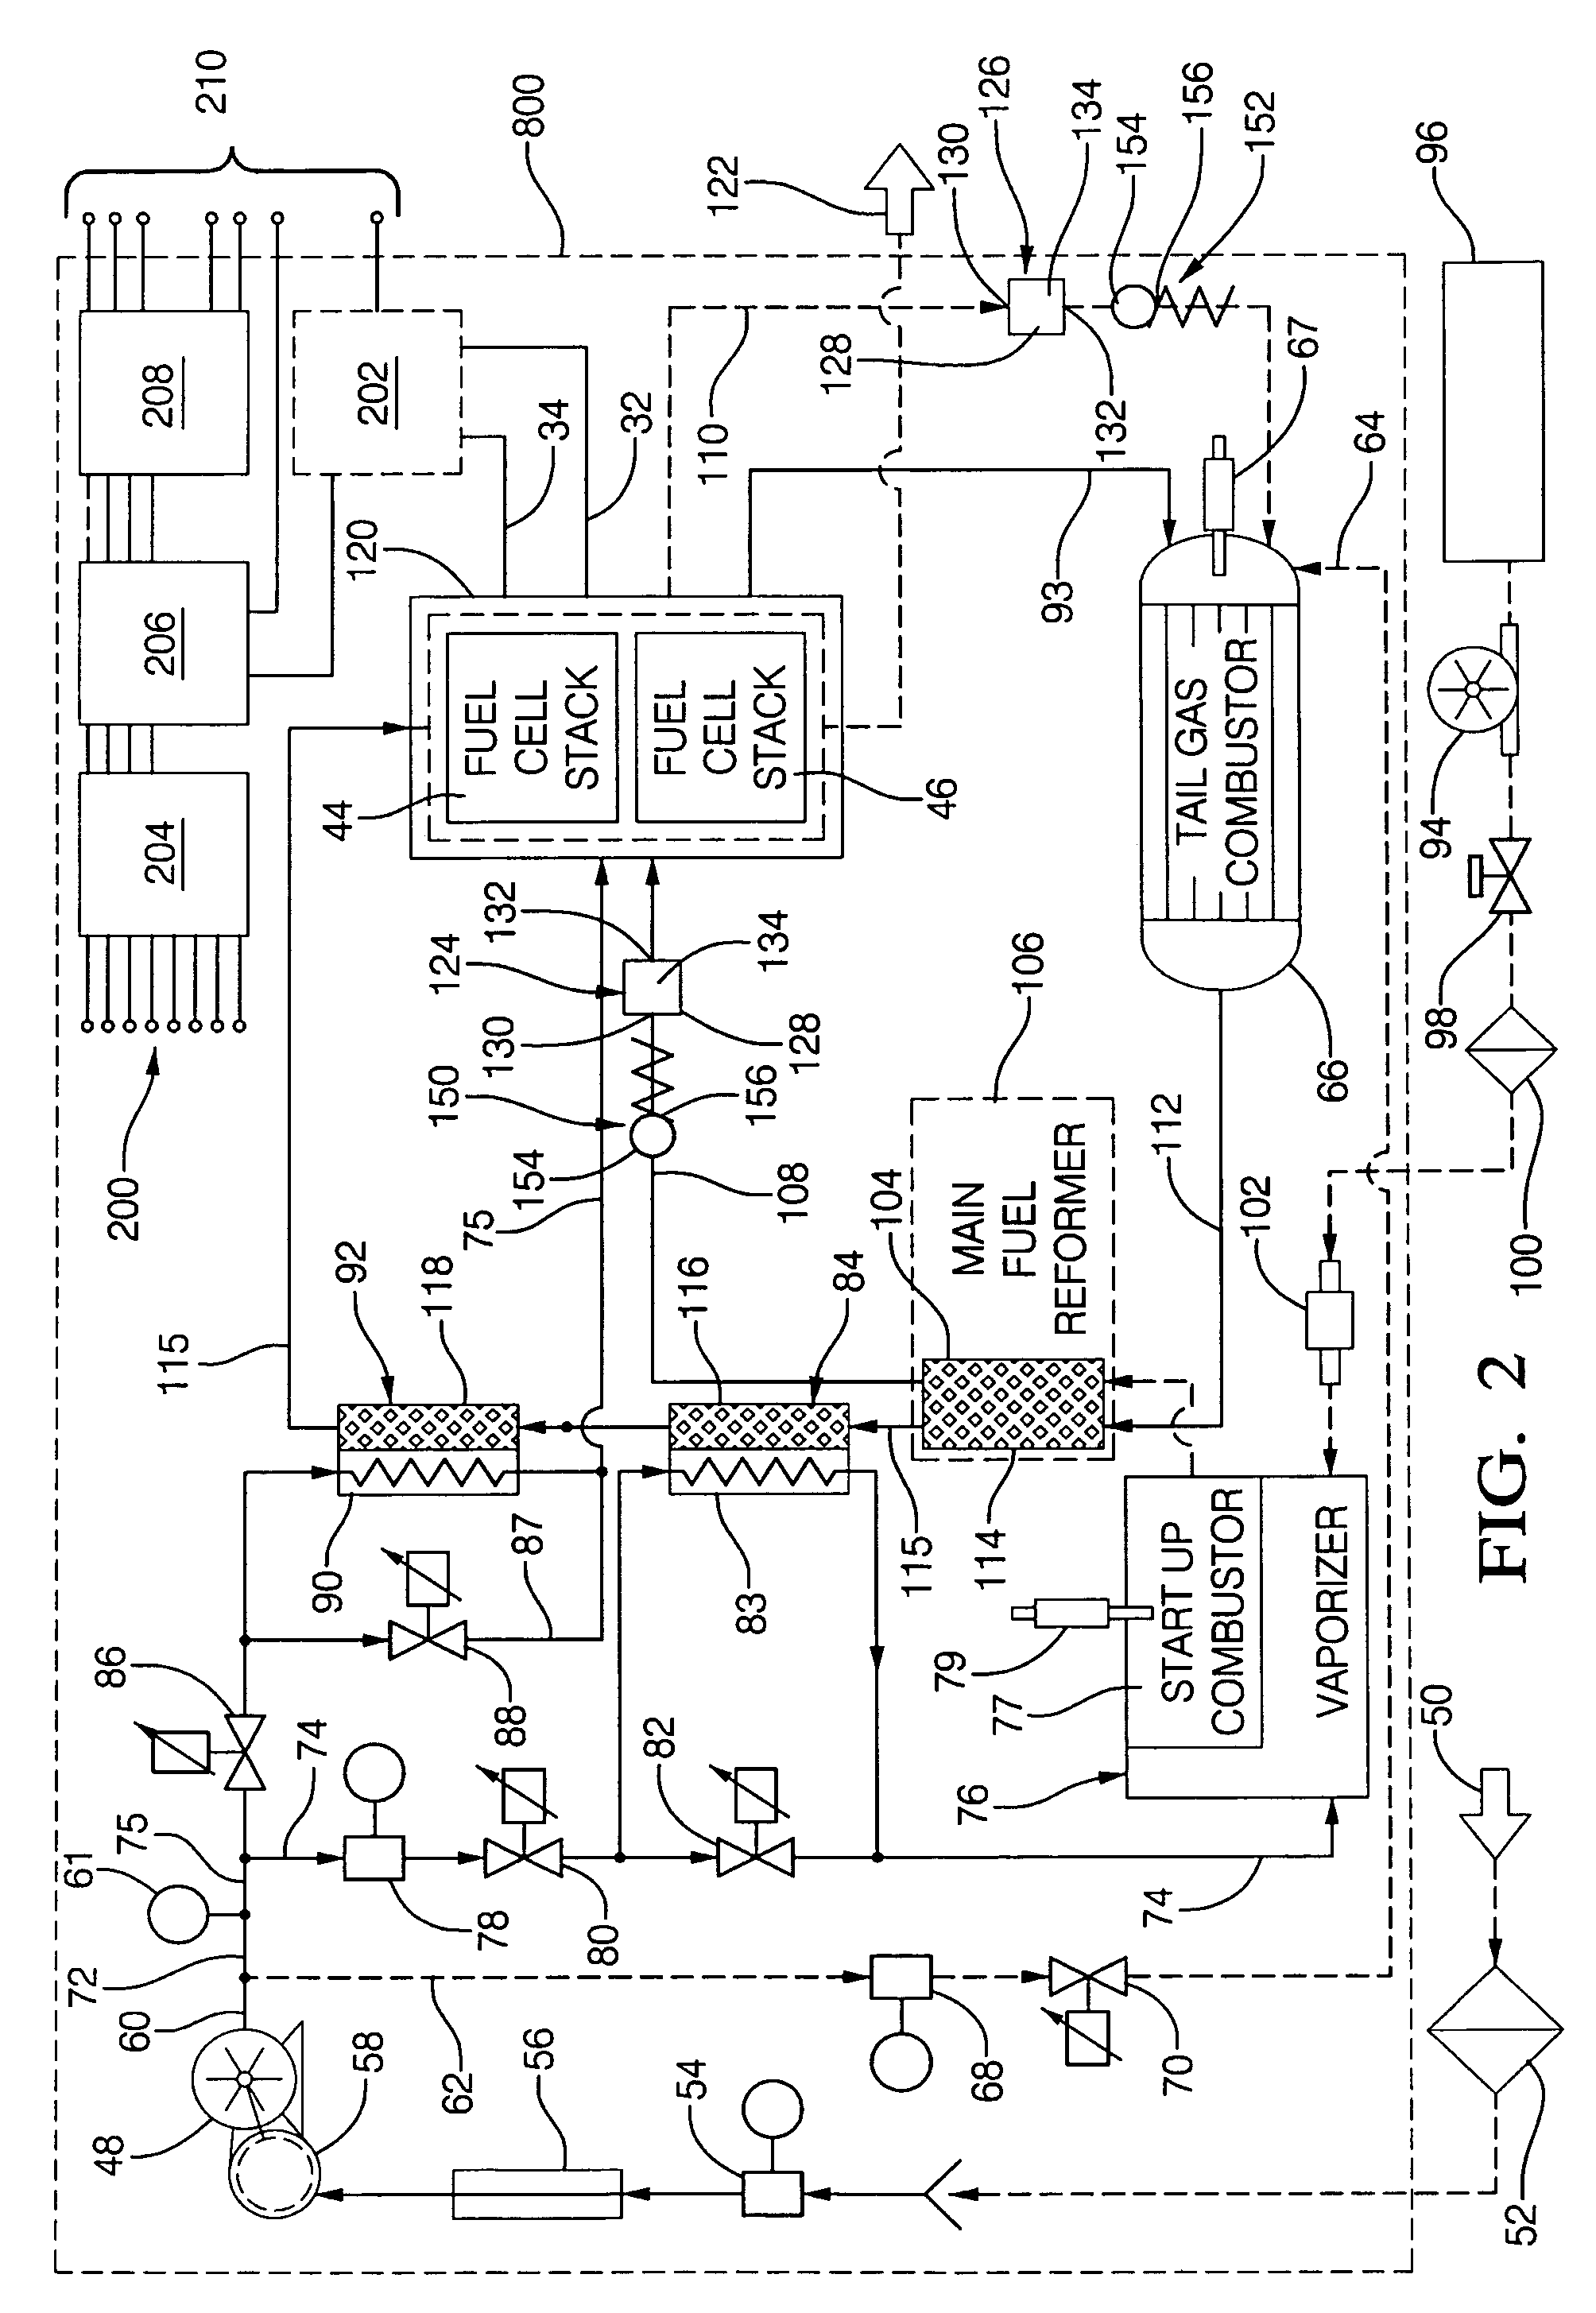 Solid-oxide fuel cell system having an integrated air/fuel manifold